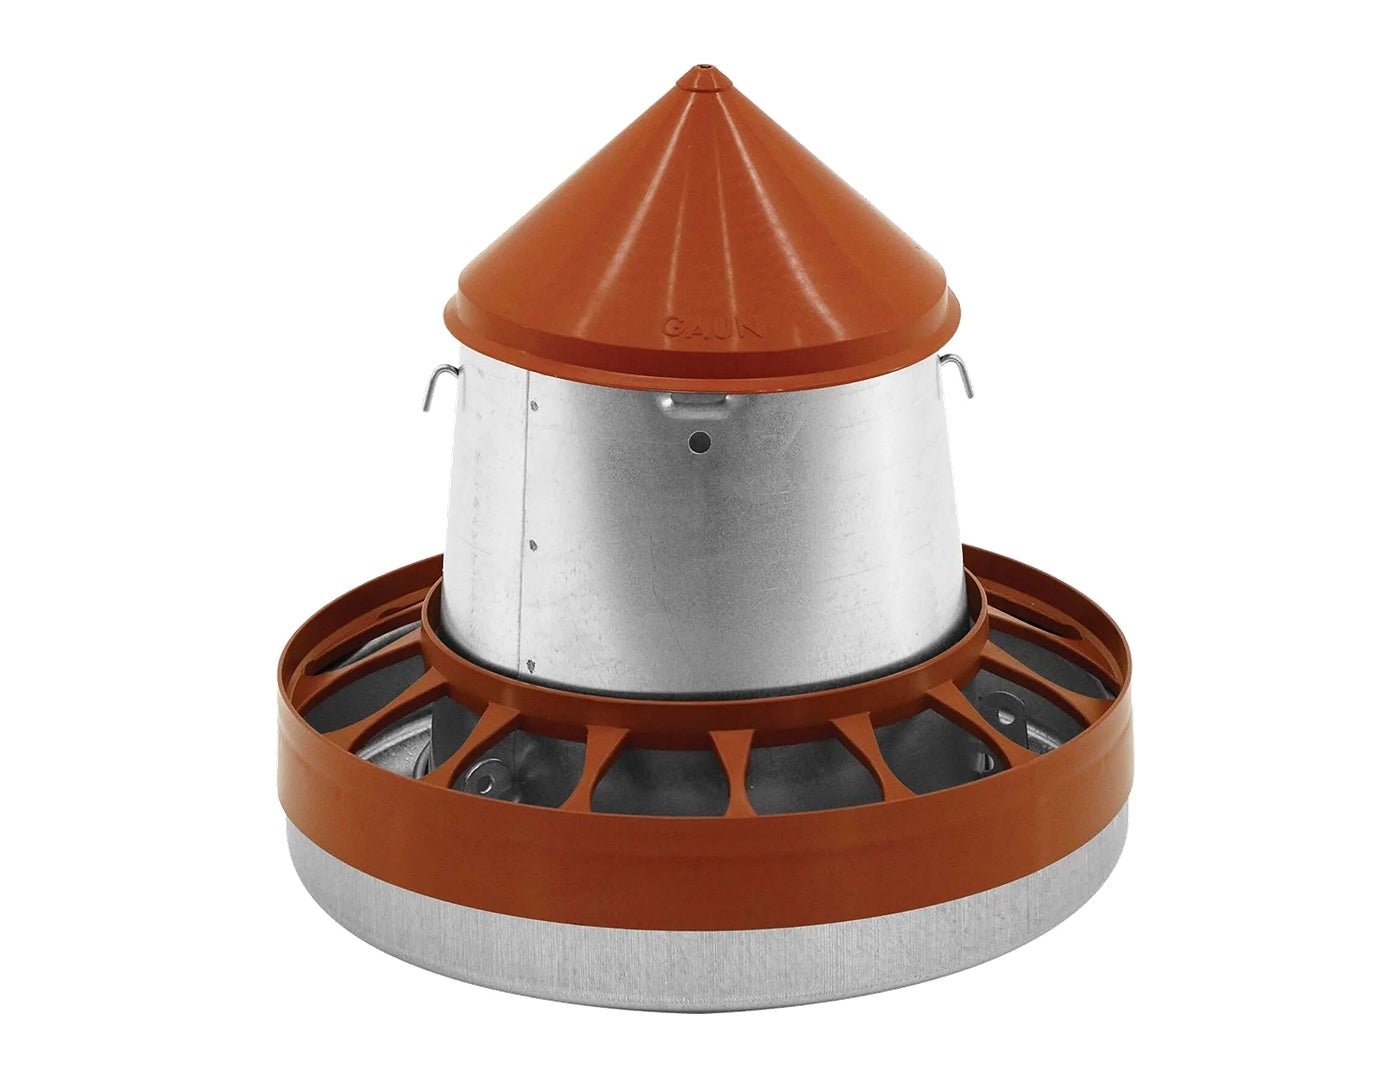 Gaun Anti-Waste Ring for the 5kg & 10kg Poultry Feeders - Buy Online SPR Centre UK